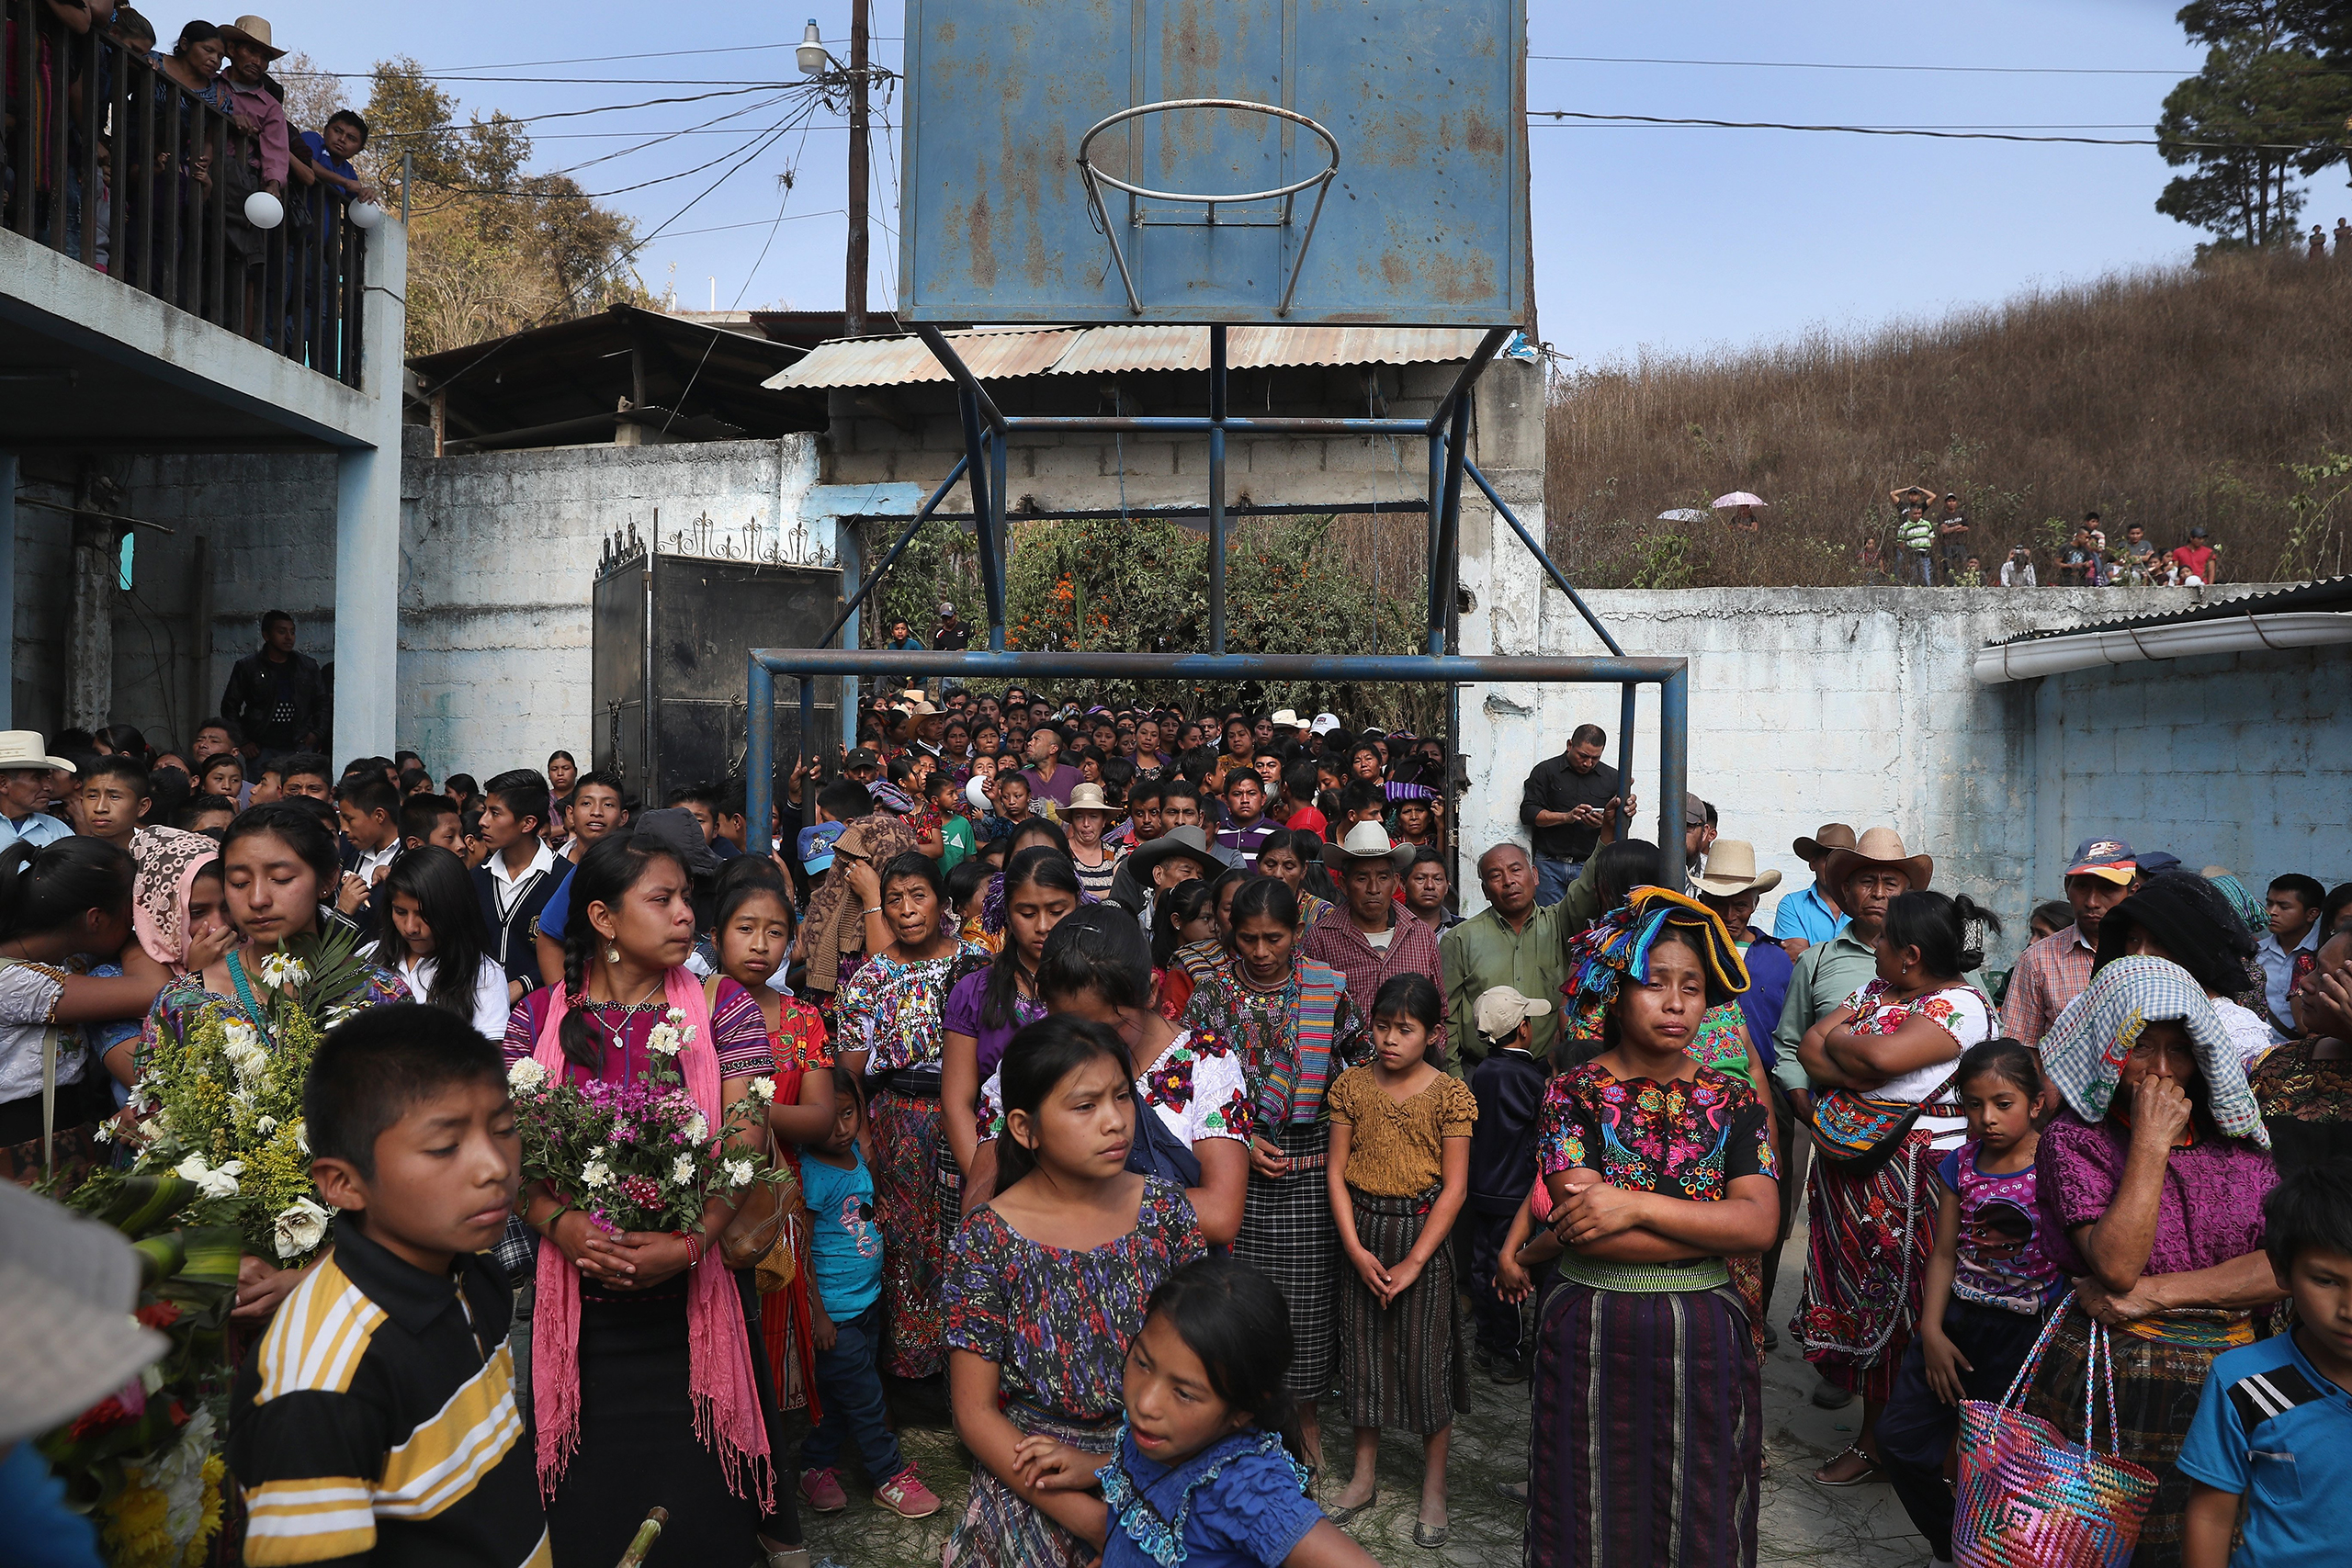 Villagers attend a memorial service held at the elementary school attended by two boys who were kidnapped and killed in San Juan Sacatepéquez on Feb. 14, 2017.